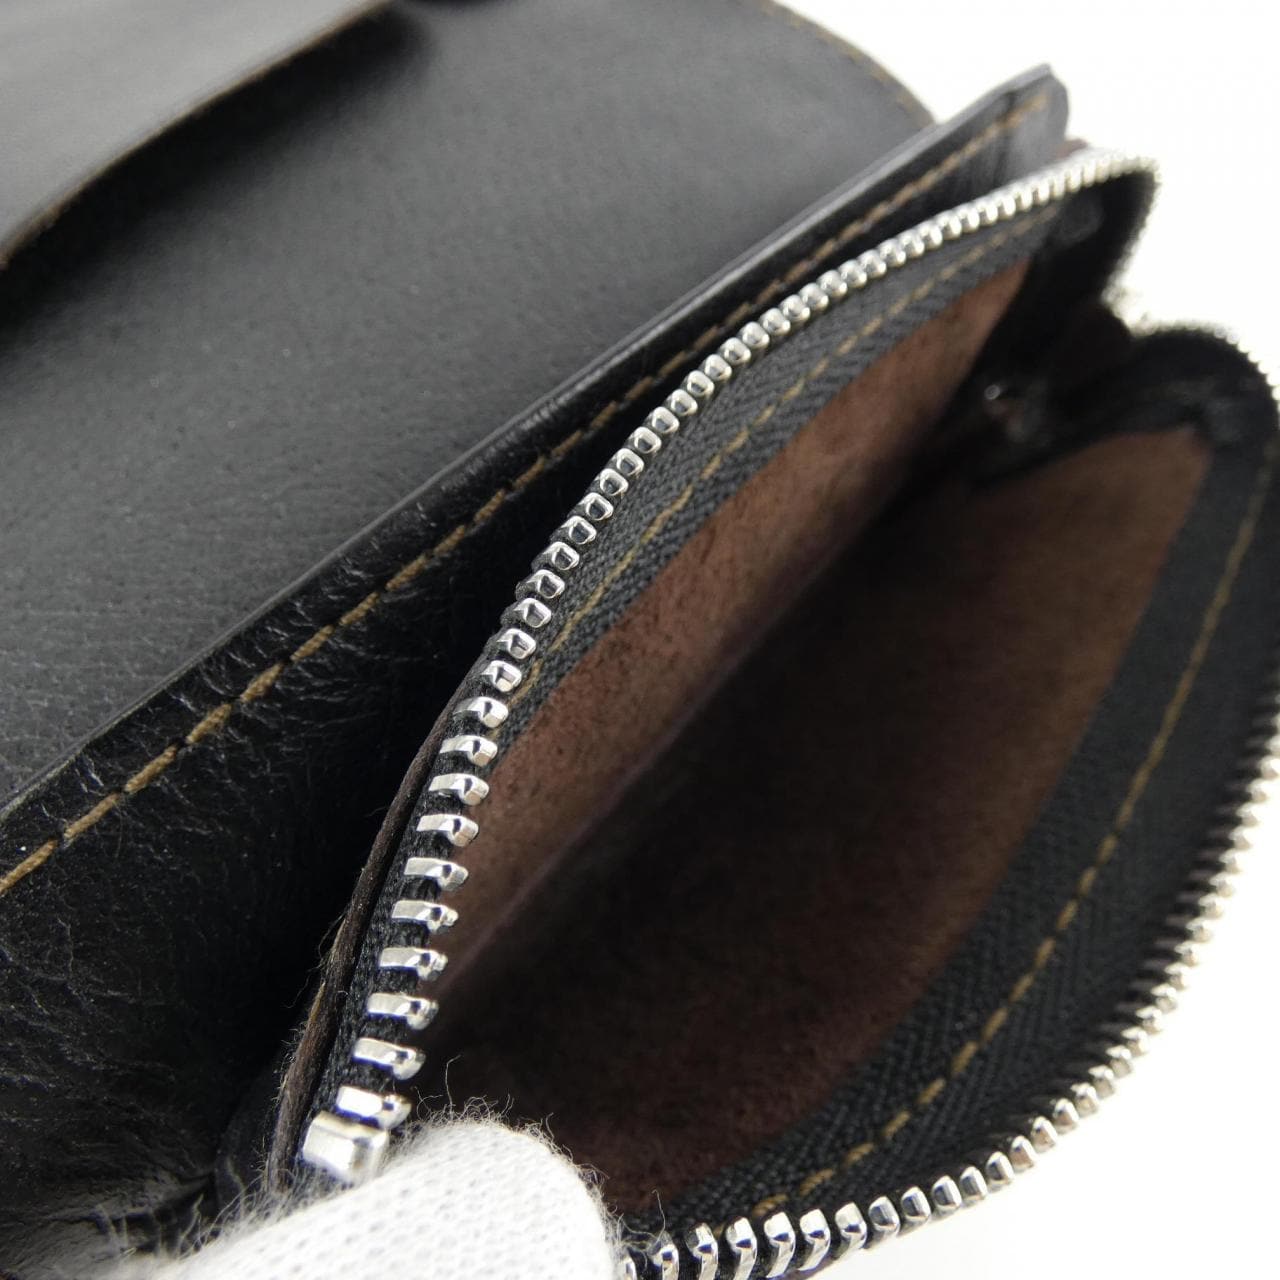 Groover Leather WALLET